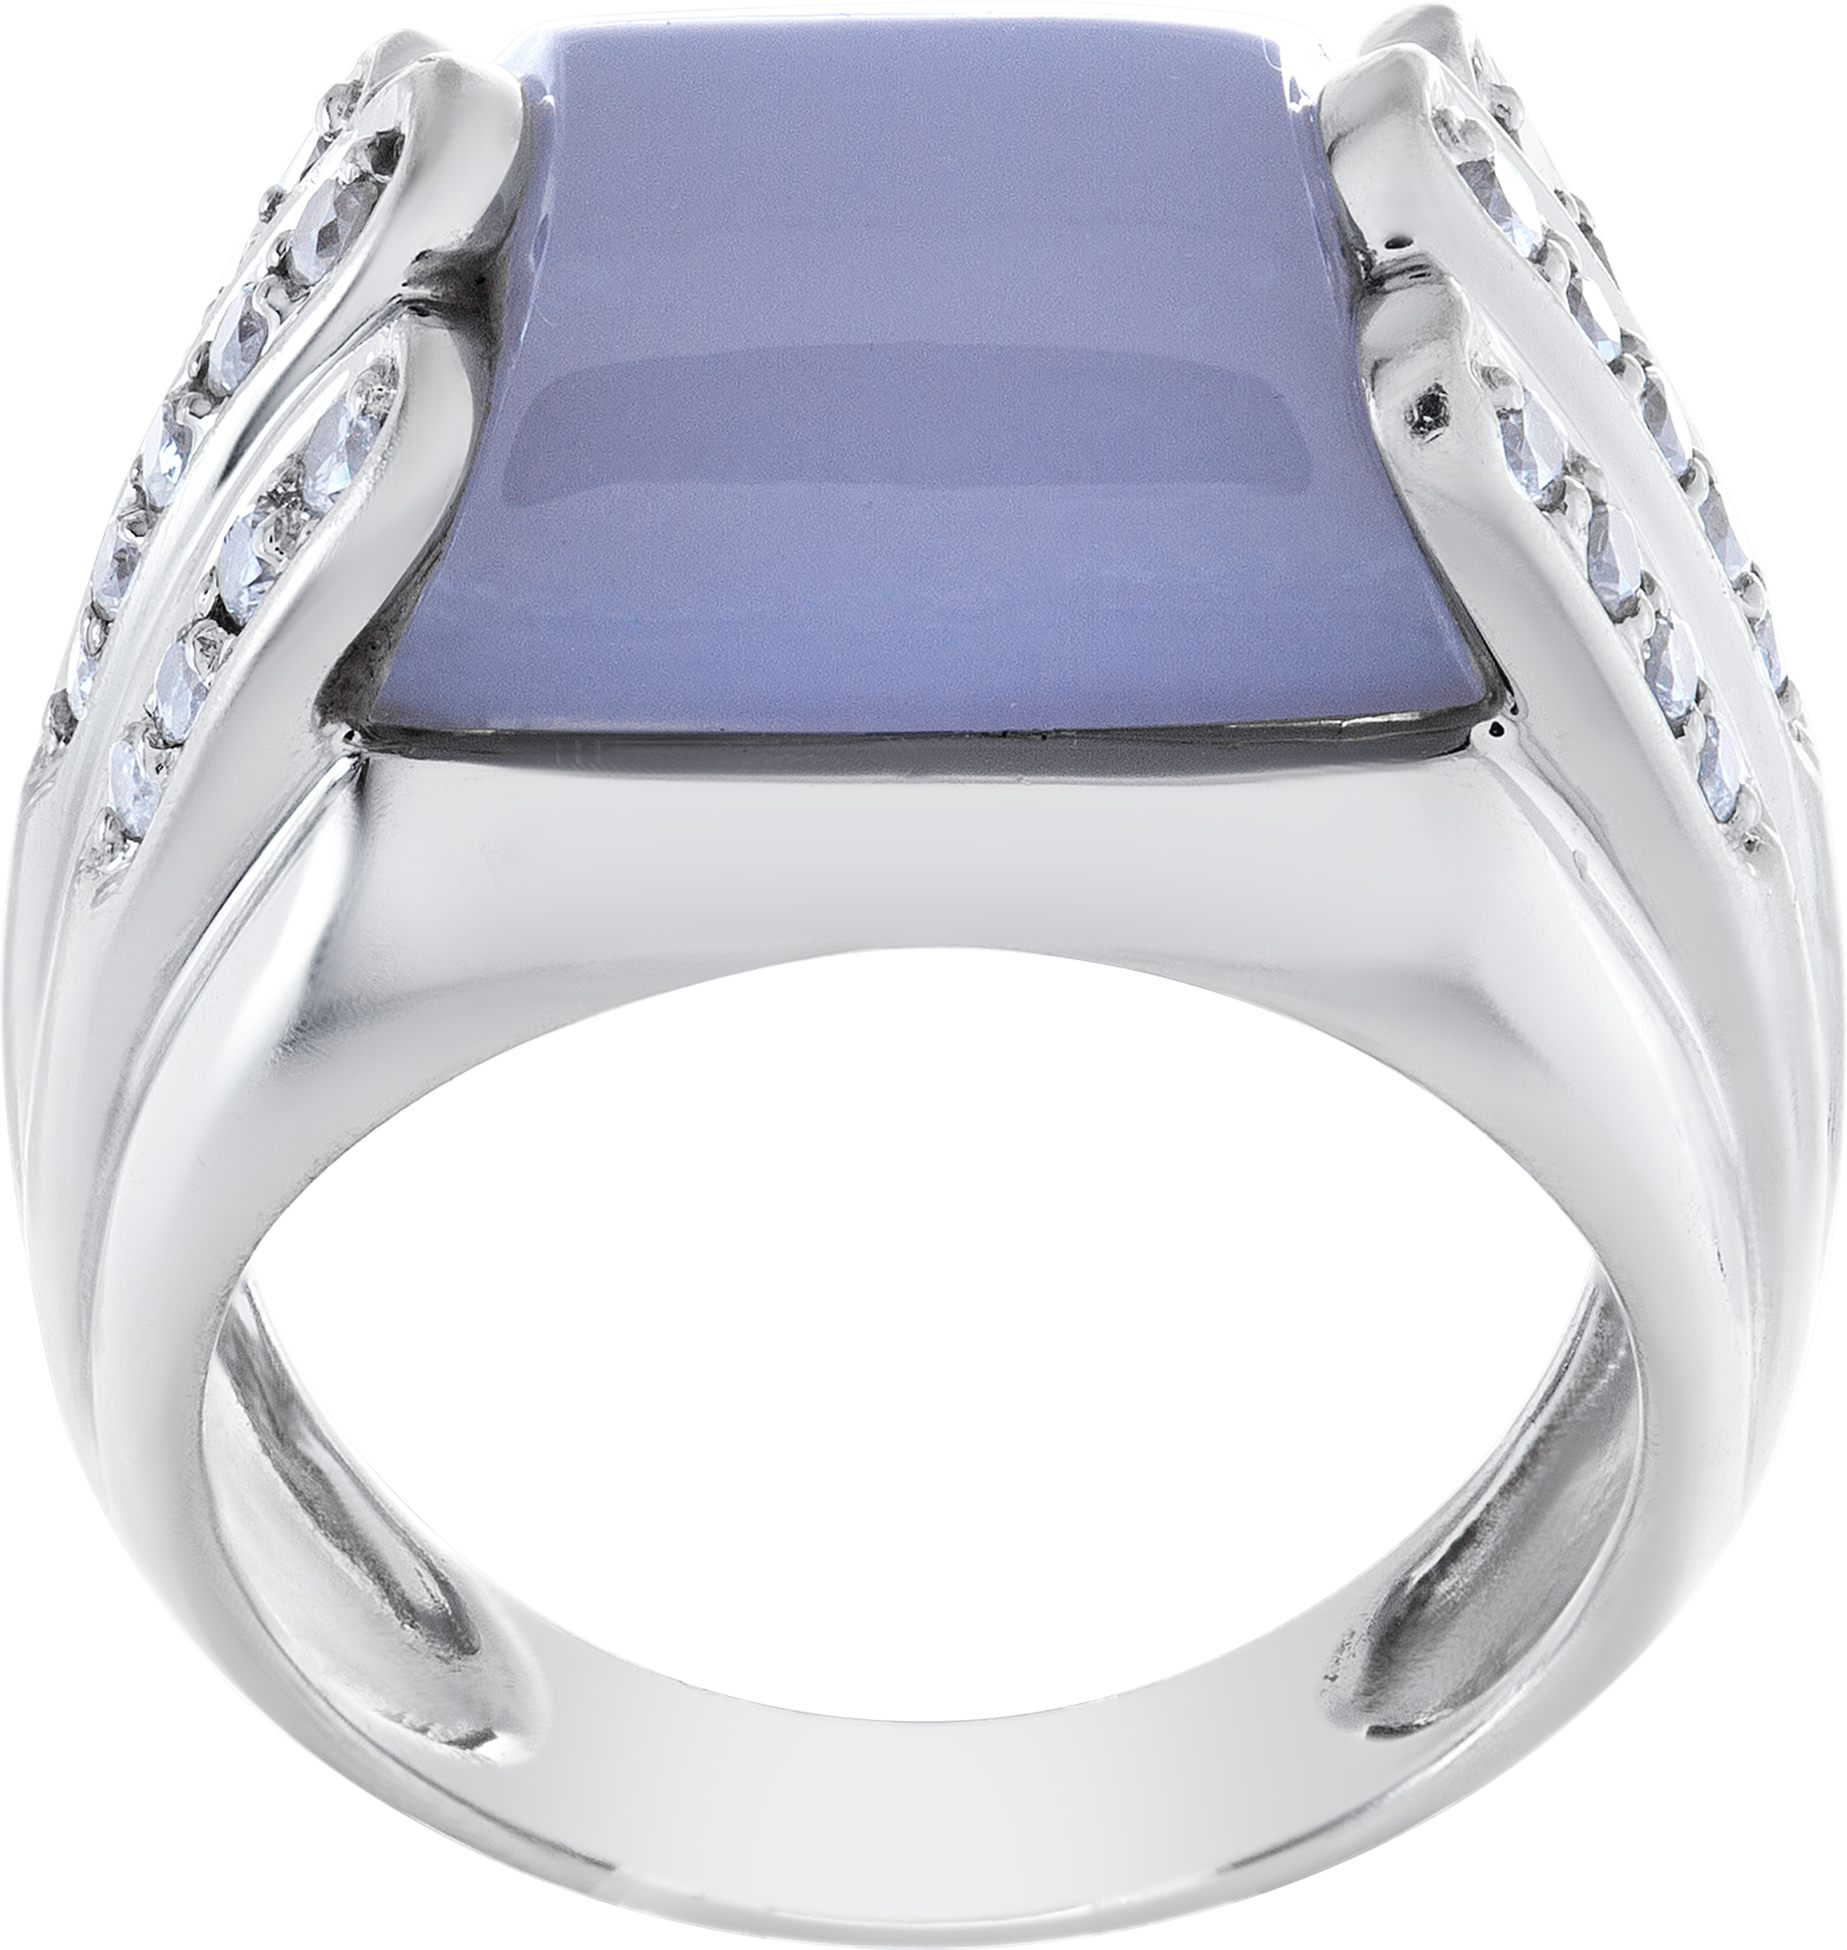 Purple chalcedony and diamond ring in 18k white gold